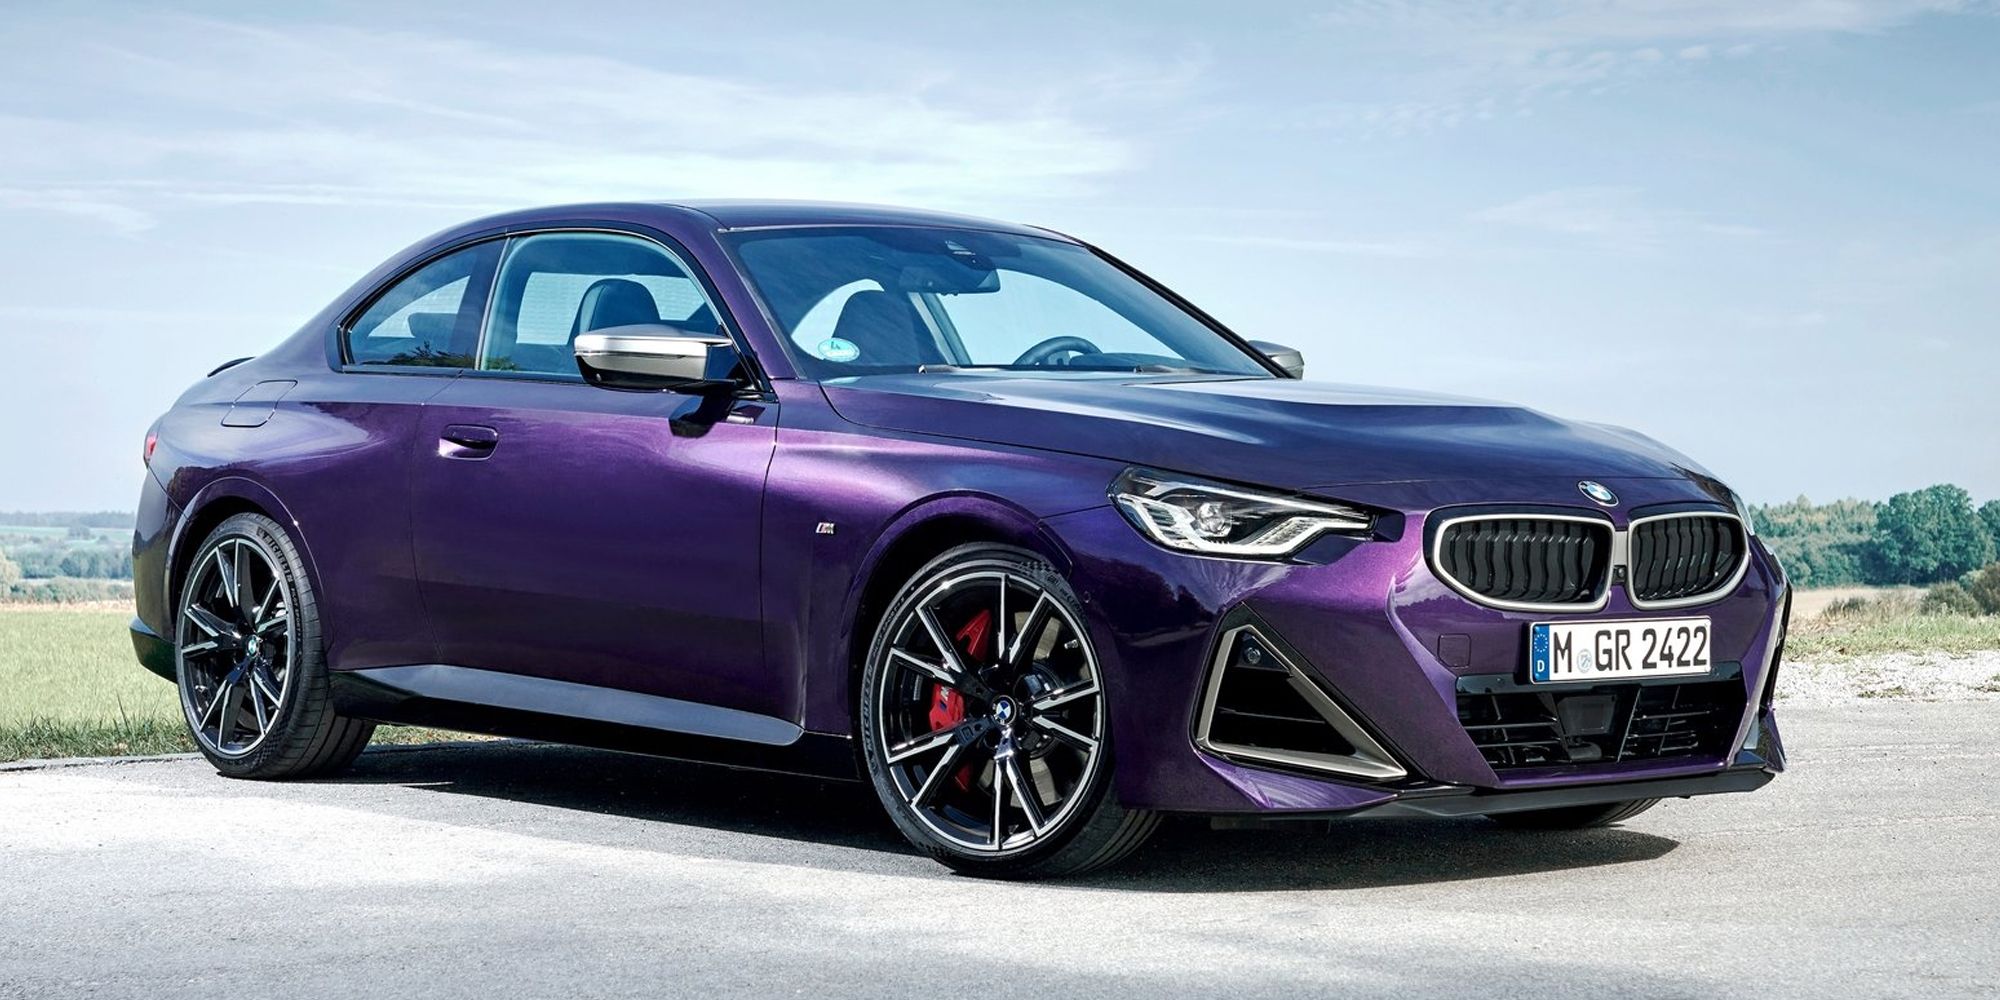 Front 3/4 view of a purple M240i